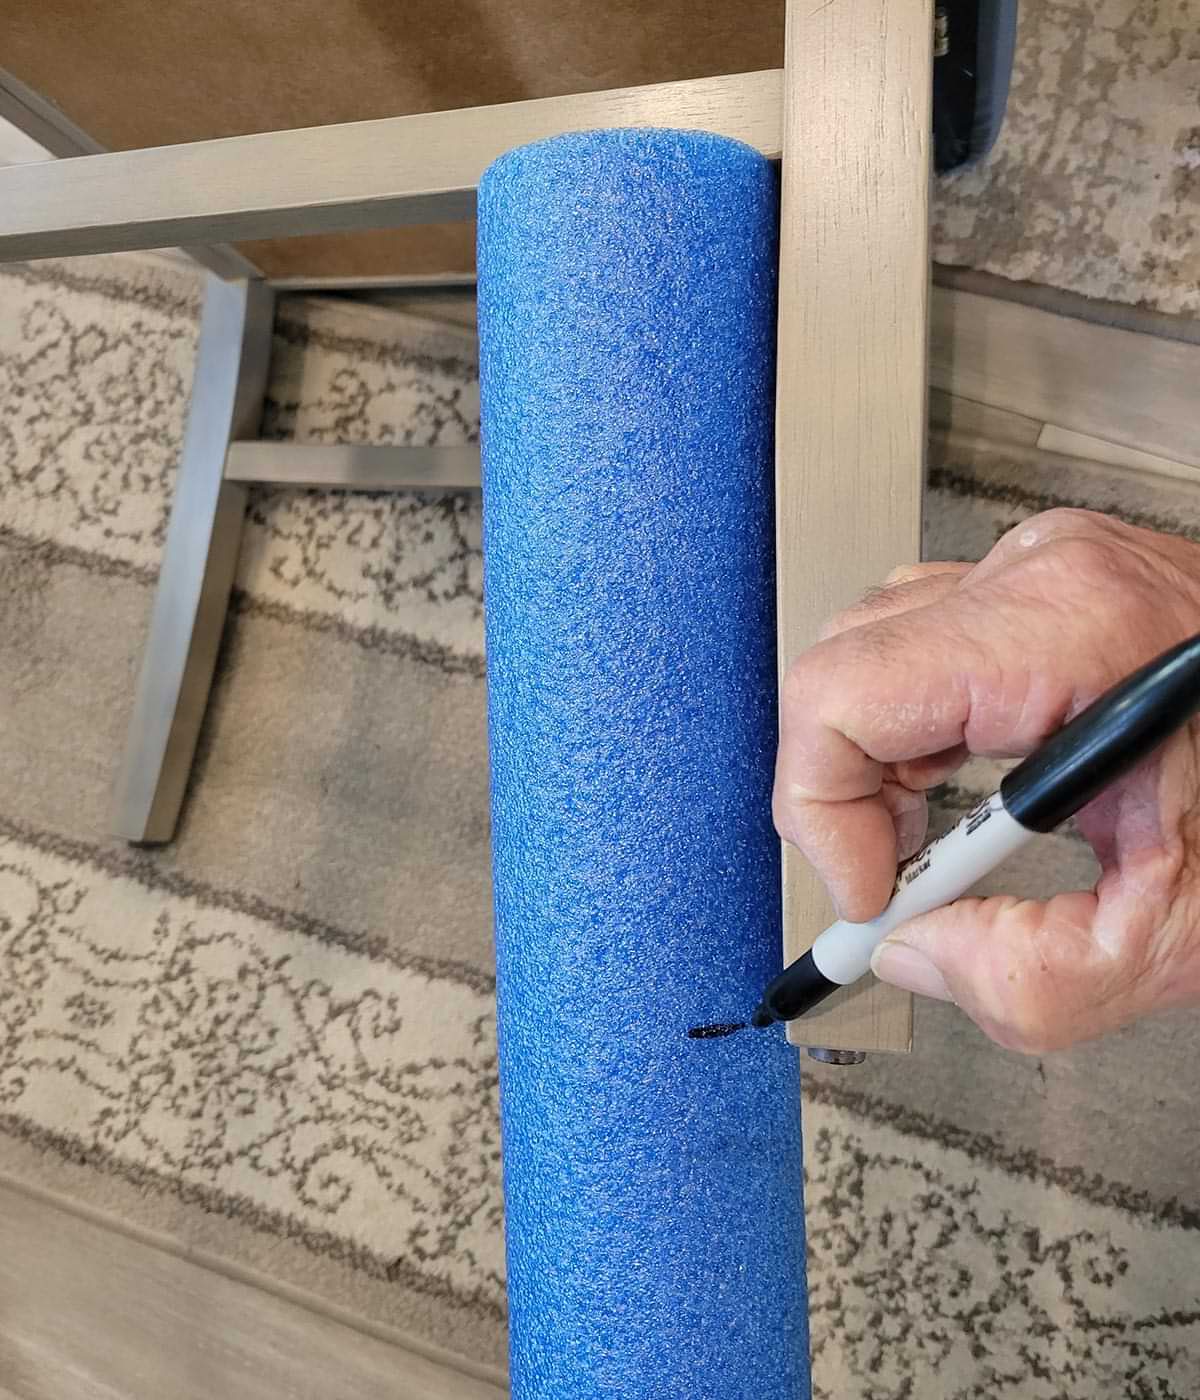 a sharpie is used to mark the horizontal cut location on a bright blue swim noodle held the length of a chair leg, below it's rung